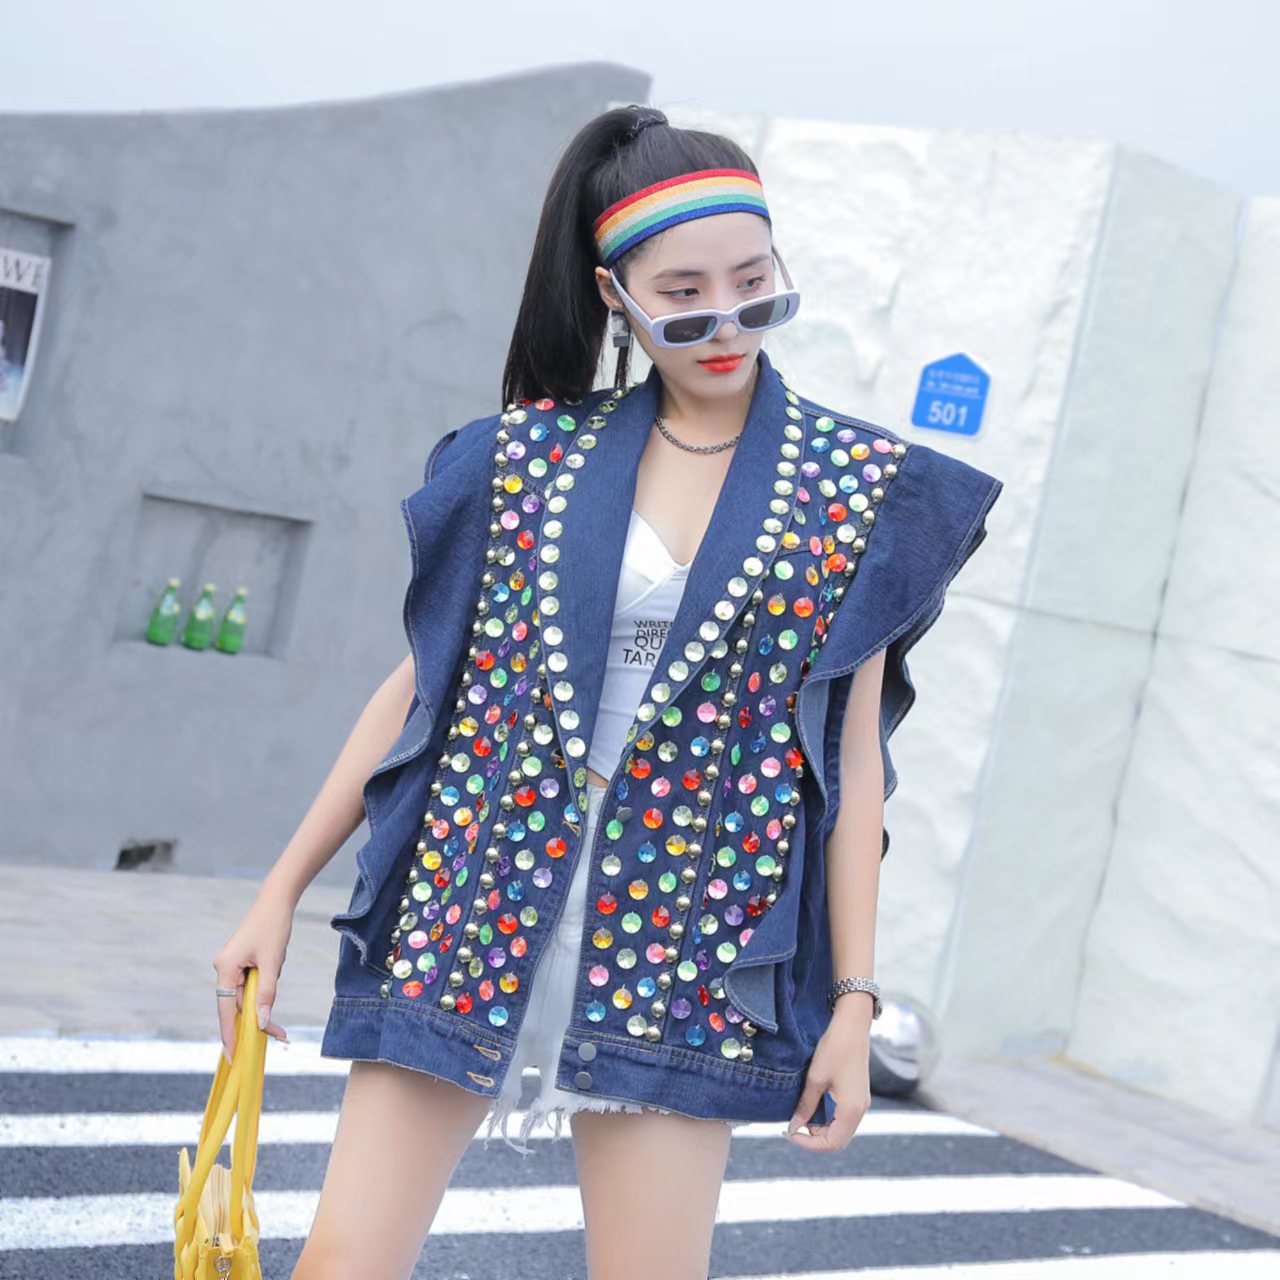 A woman wearing a colorful, Maramalive™ Heavy Duty Diamond Studded Denim Vest With Wooden Ear Edge with beaded sequins, white top, and mirrored sunglasses, holding a yellow bag and posing on a street. A rainbow headband adorns her high ponytail.